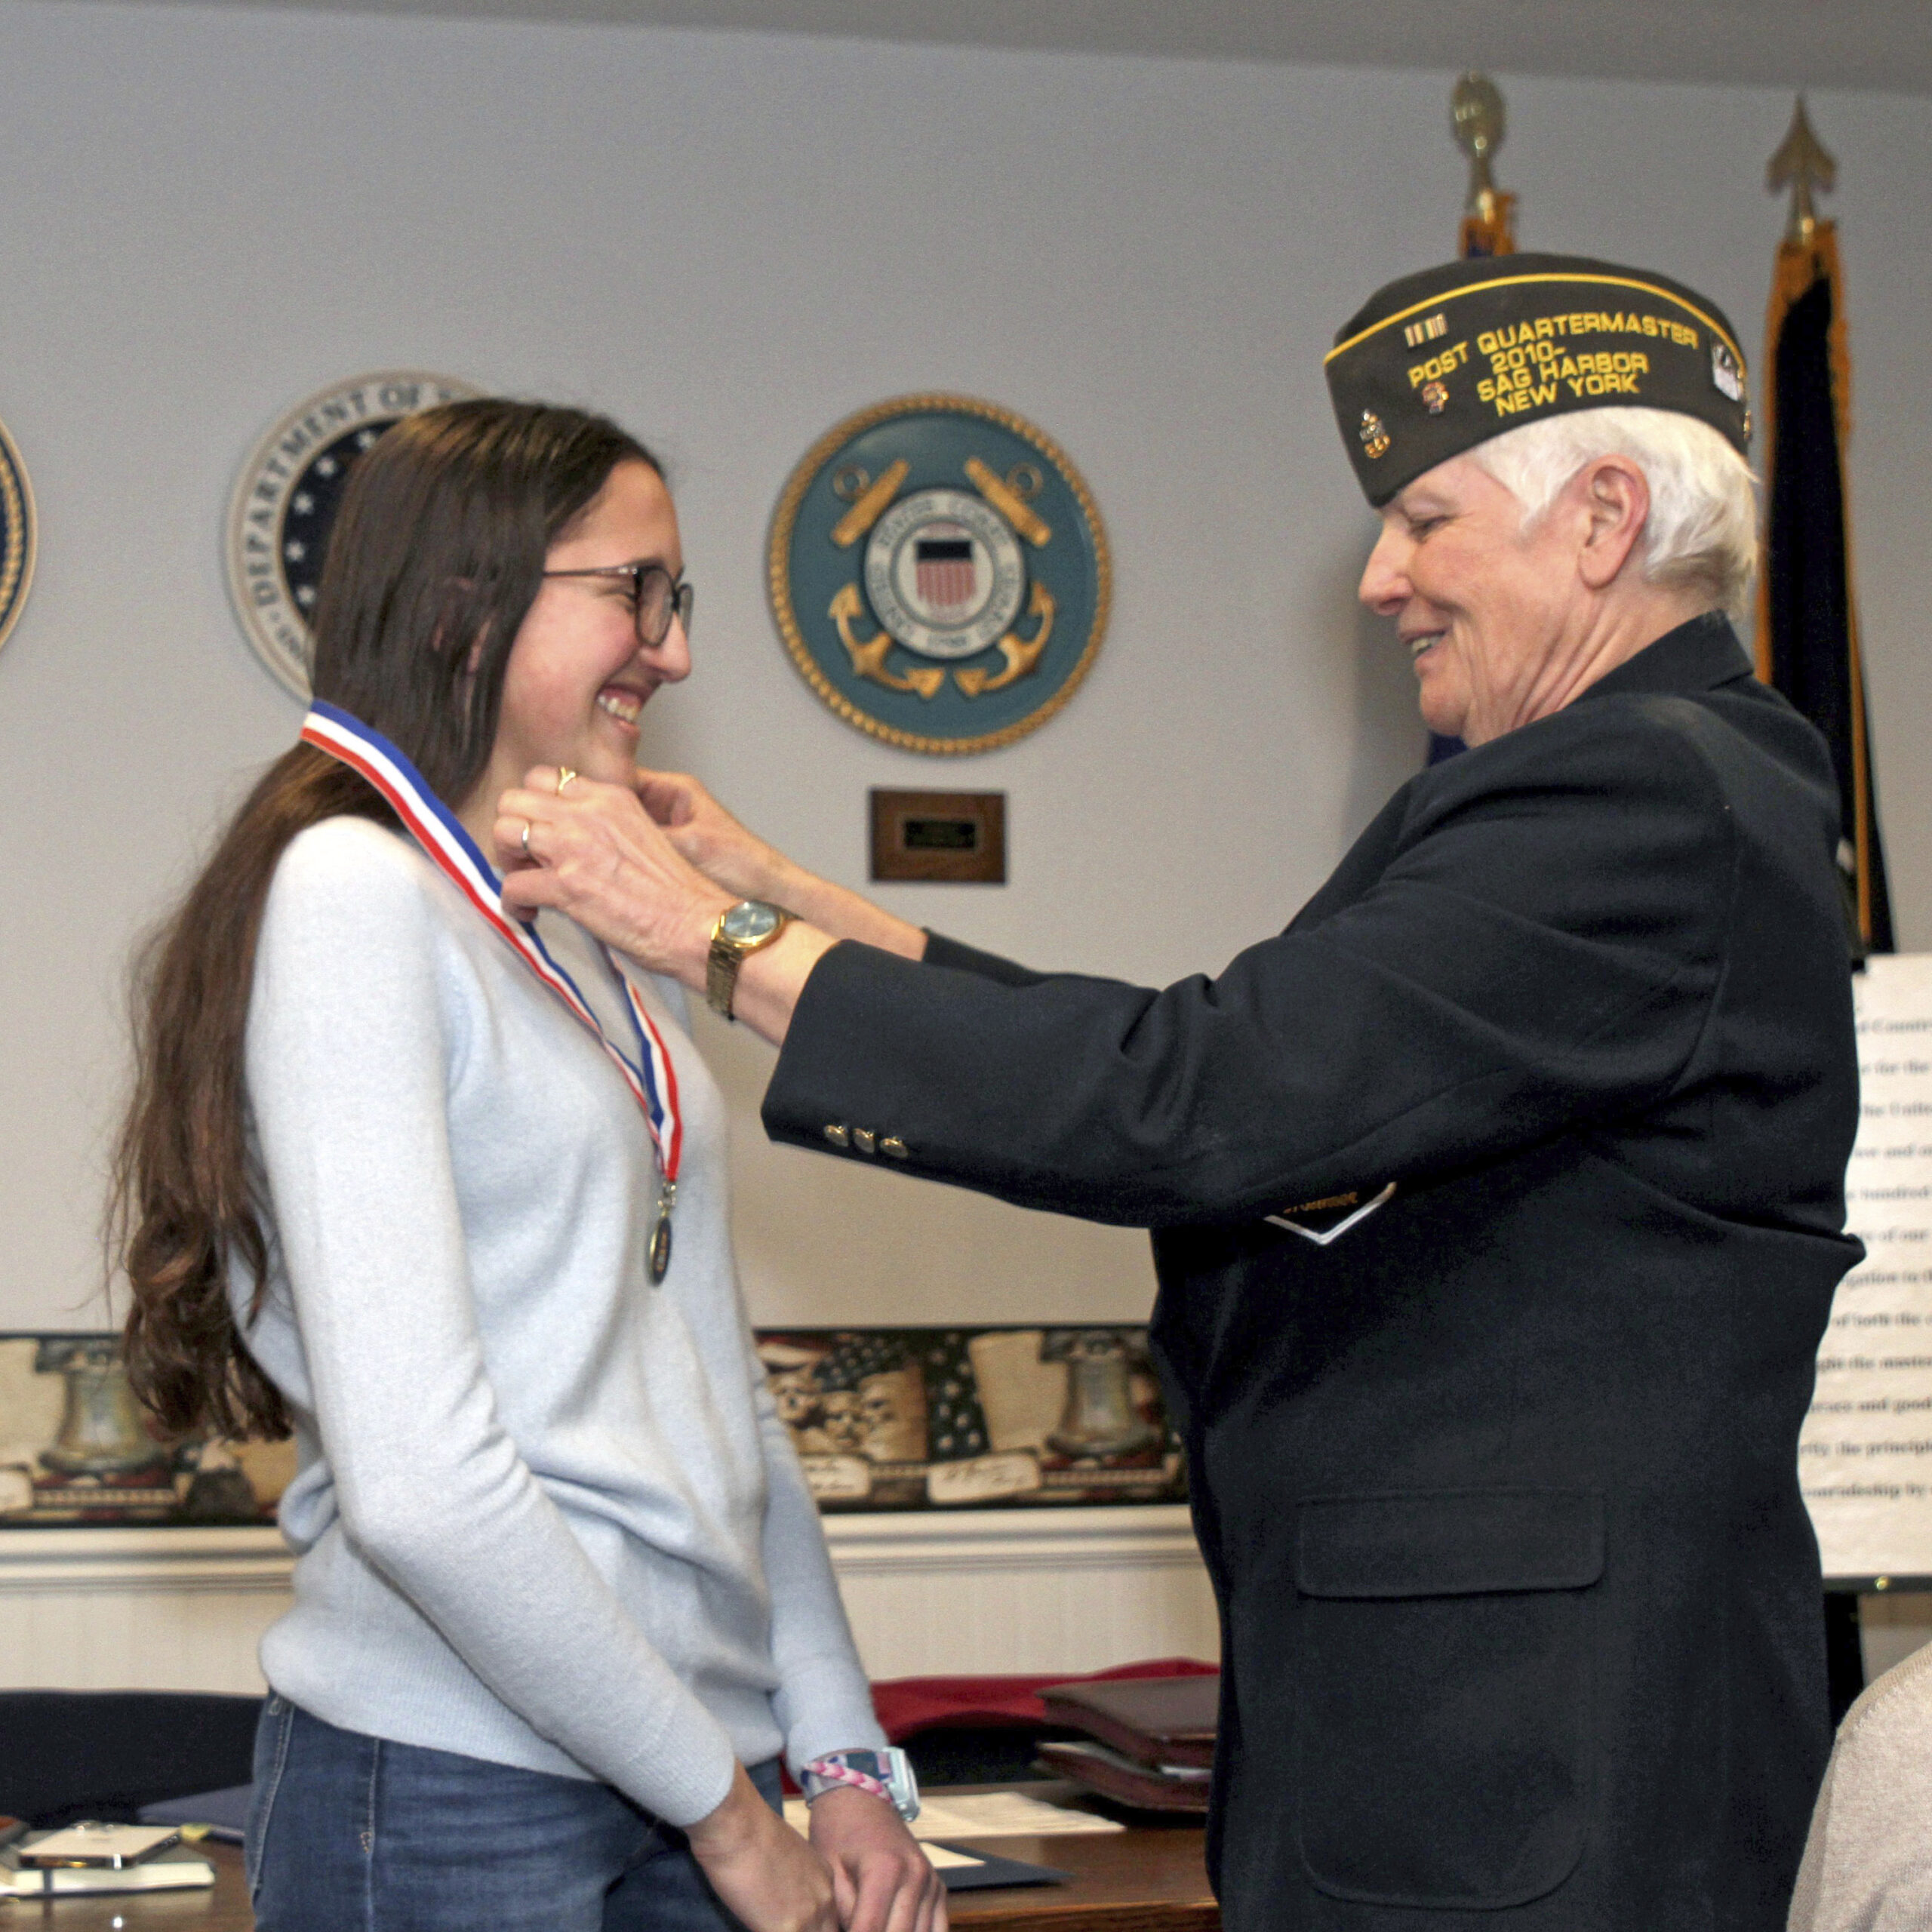 Sharon Lewis, Quartermaster, VFW Post 9082 of Sag Harbor, presents Pierson junior Isabelle Caplin with the  Post’s Voice of Democracy award on January 16 at the post.  Isabelle's entry has been forwarded to the next level NY District 11for consideration.  TOM KOCHIE